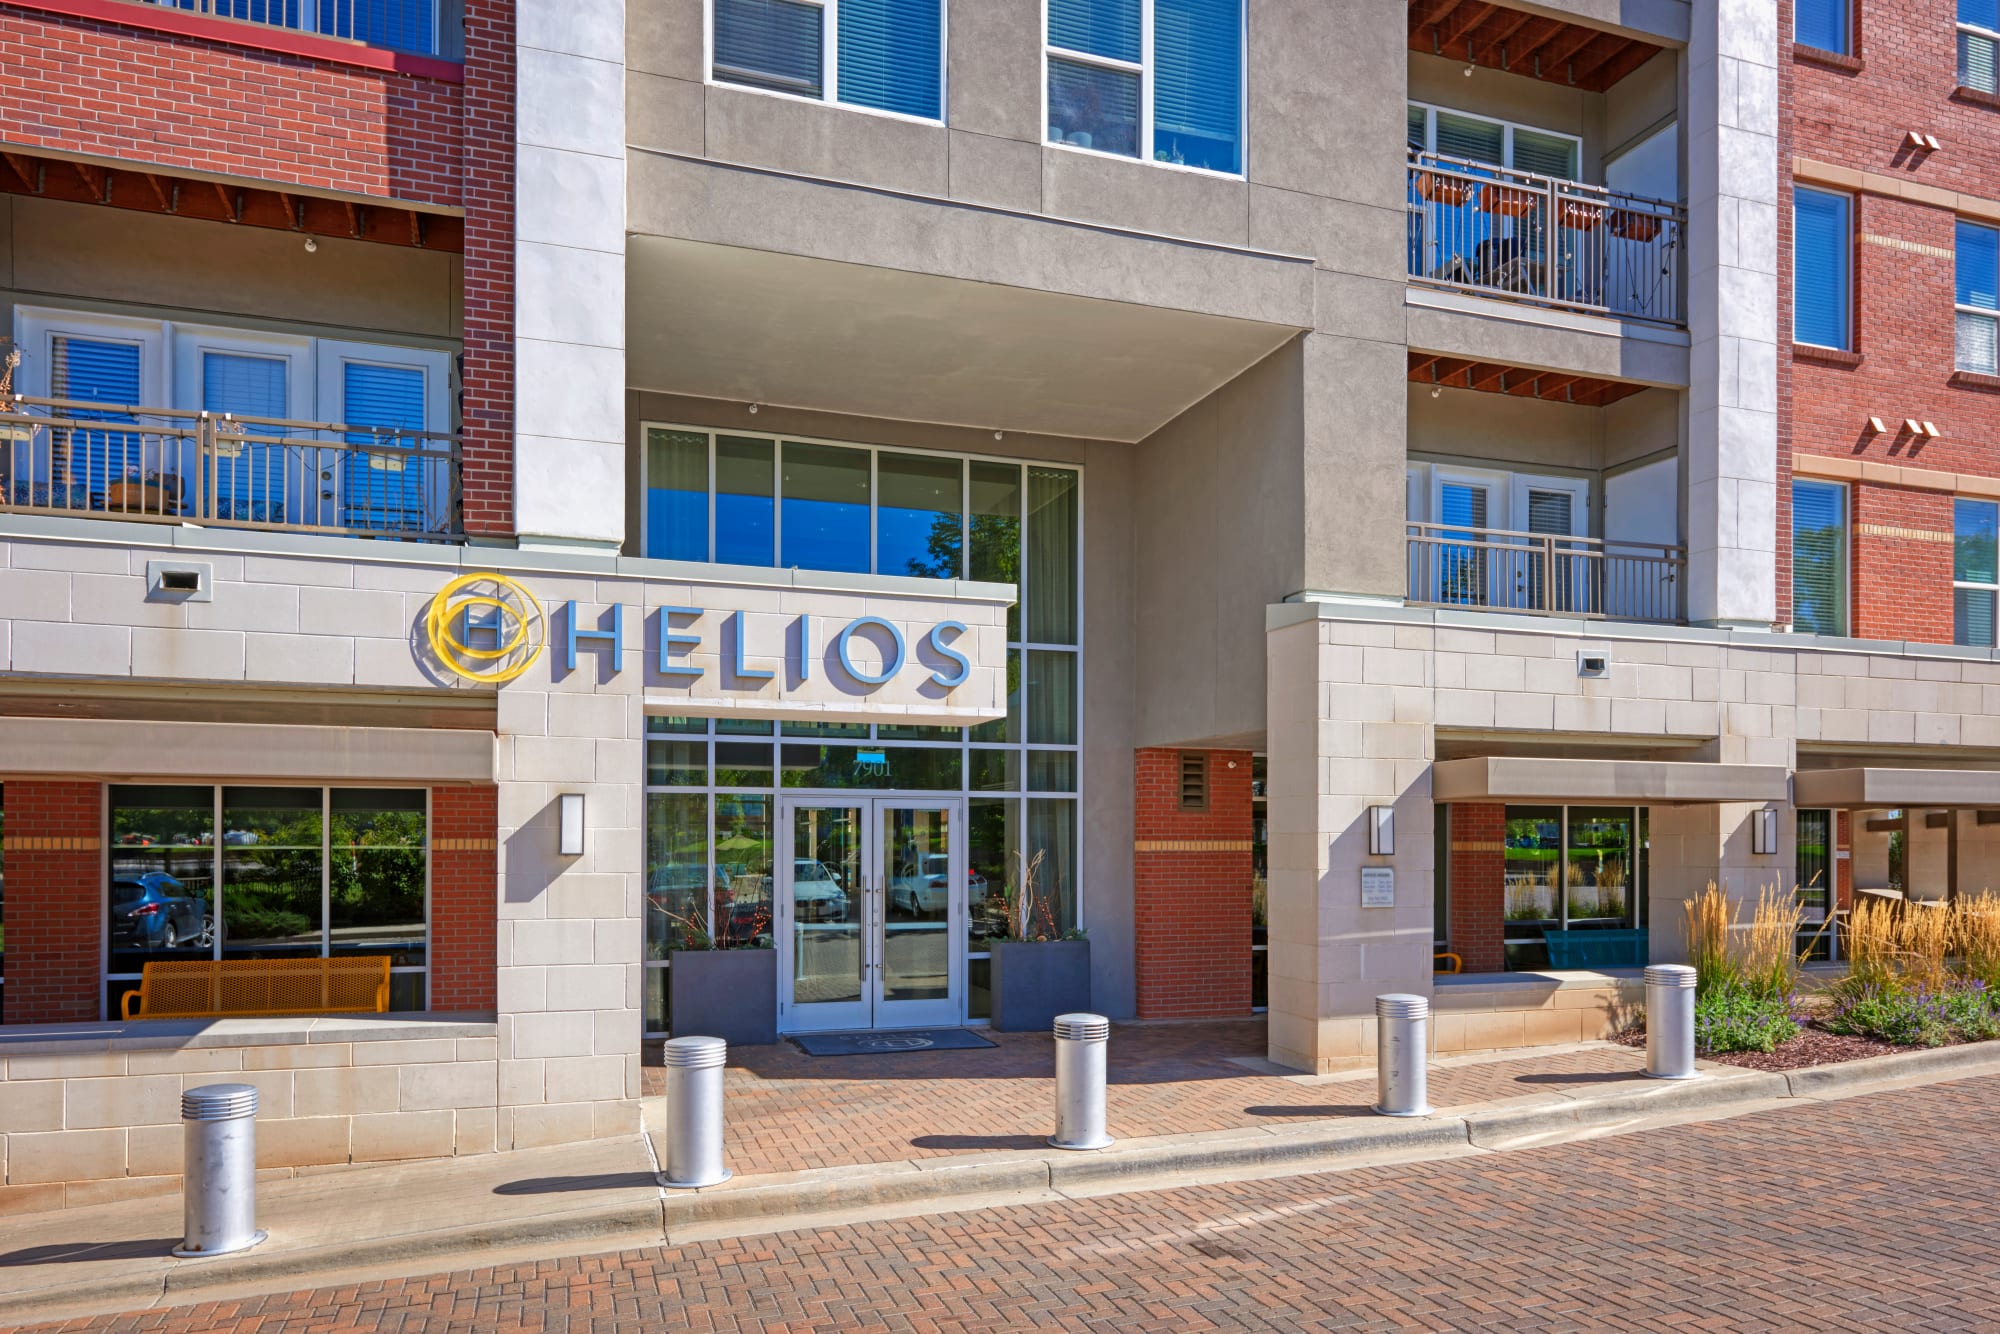 The entrance to the leasing office at Helios in Englewood, Colorado